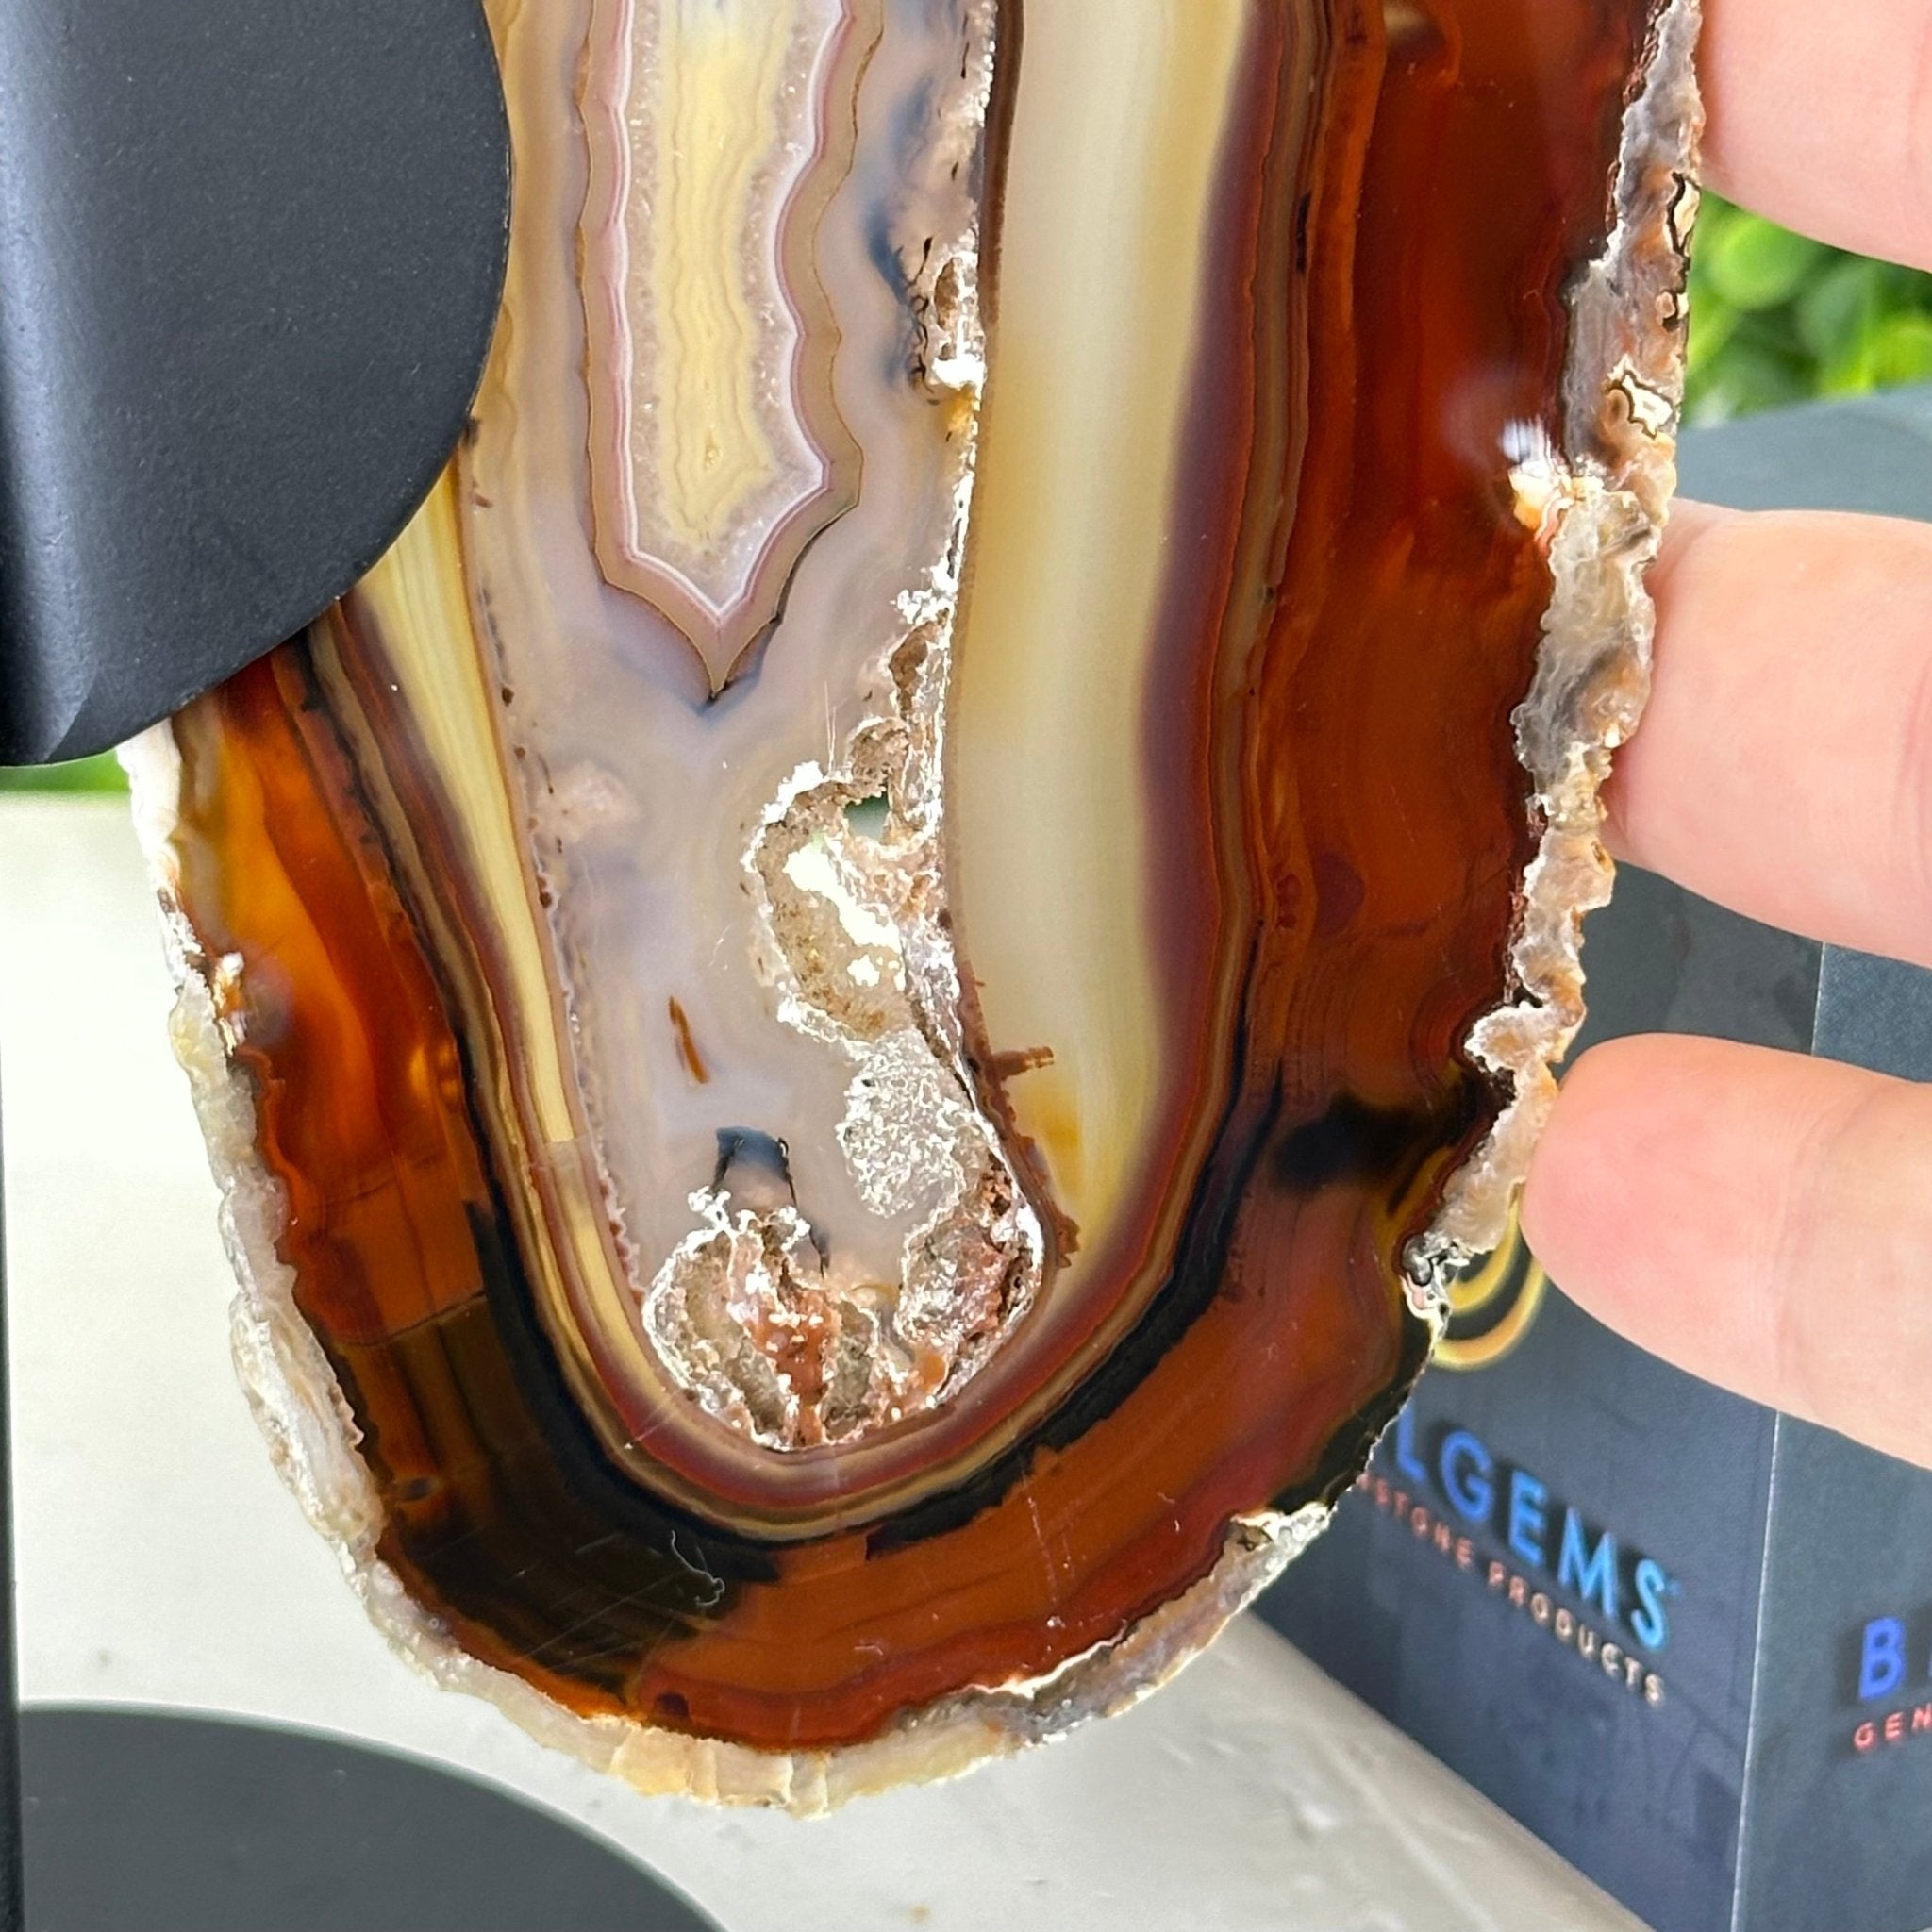 Natural Brazilian Agate "Butterfly Wings", 8.9" Tall #5050NA-147 - Brazil GemsBrazil GemsNatural Brazilian Agate "Butterfly Wings", 8.9" Tall #5050NA-147Agate Butterfly Wings5050NA-147